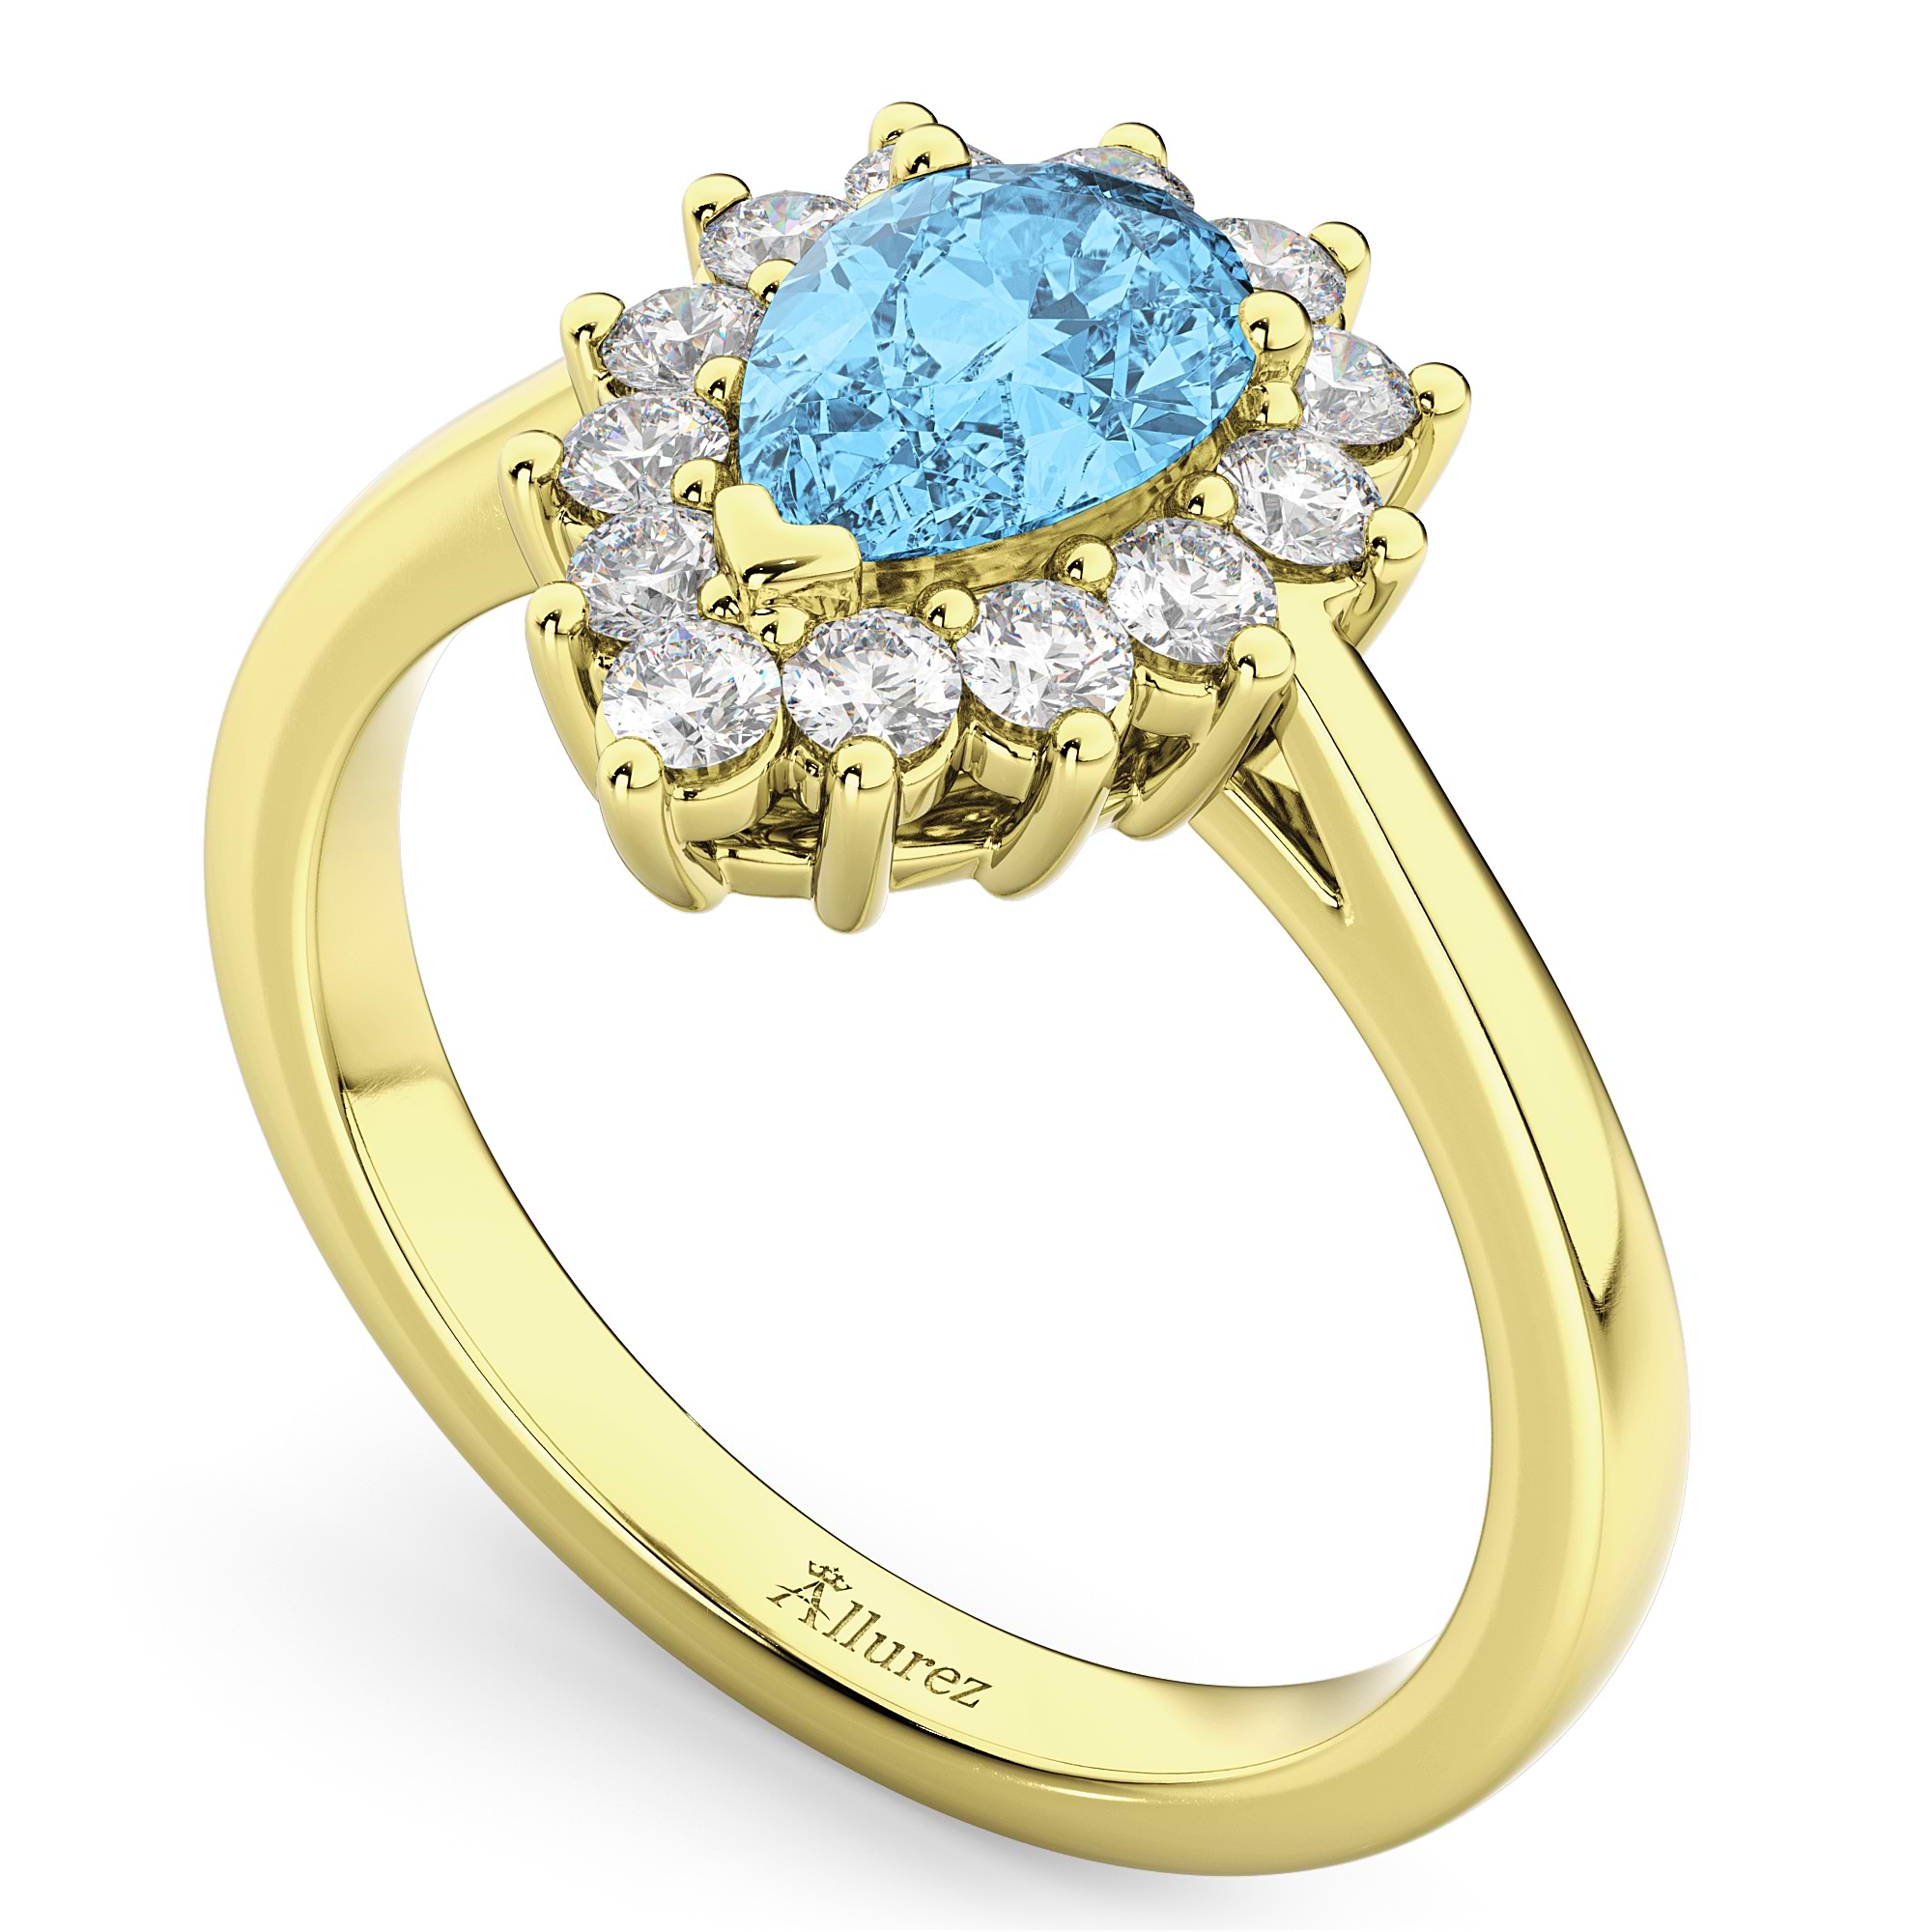 Halo Blue Topaz & Diamond Floral Pear Shaped Fashion Ring 14k Yellow Gold (1.42ct)